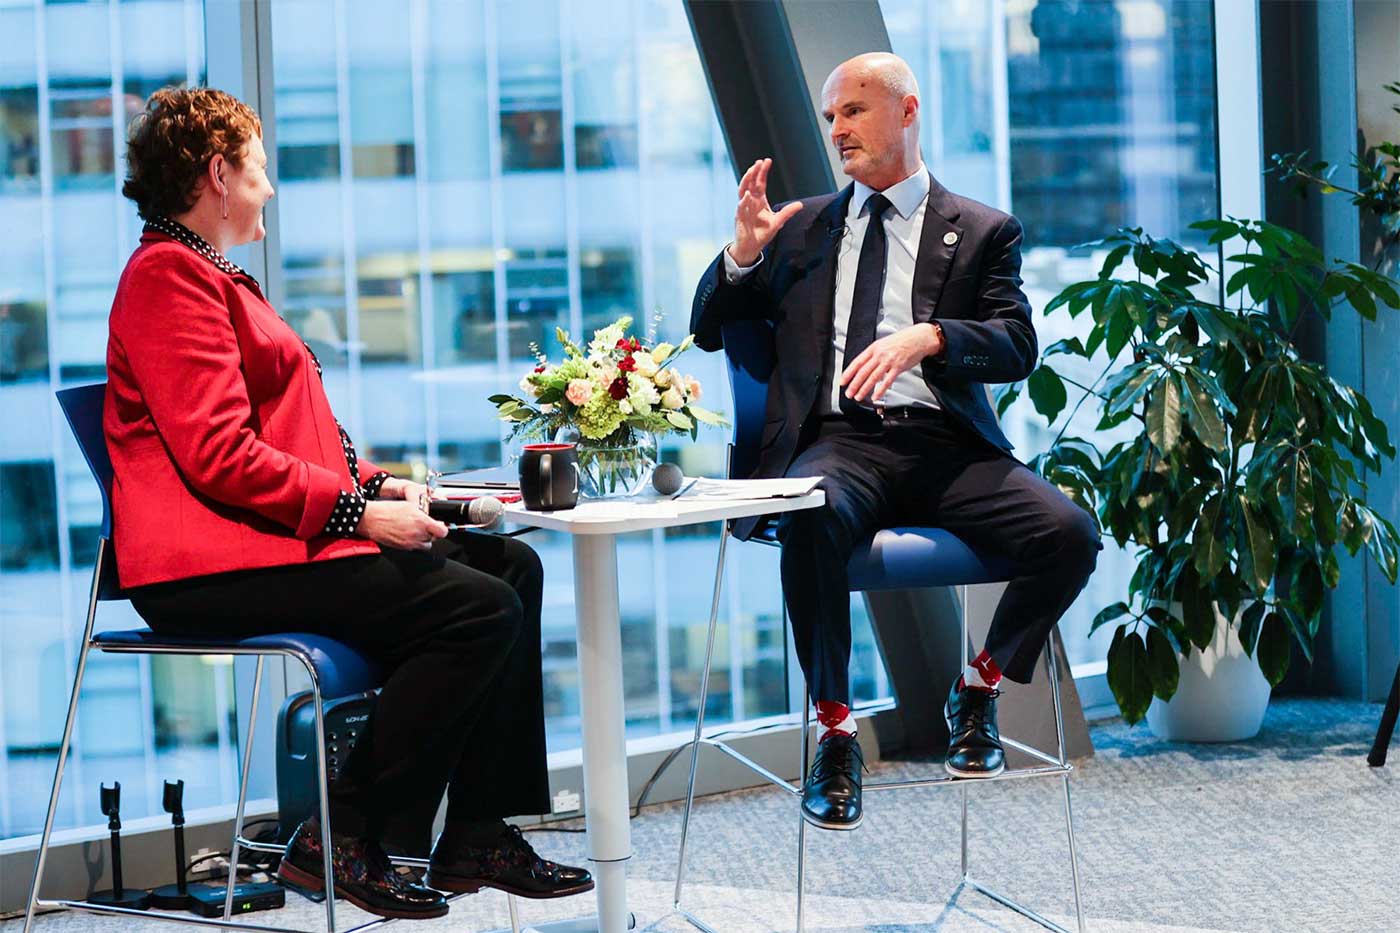 Dean Elizabeth Mynatt and Steve Eccles, Dean and CEO of the Vancouver Campus during the fireside chat at the 40th Anniversary Celebration.